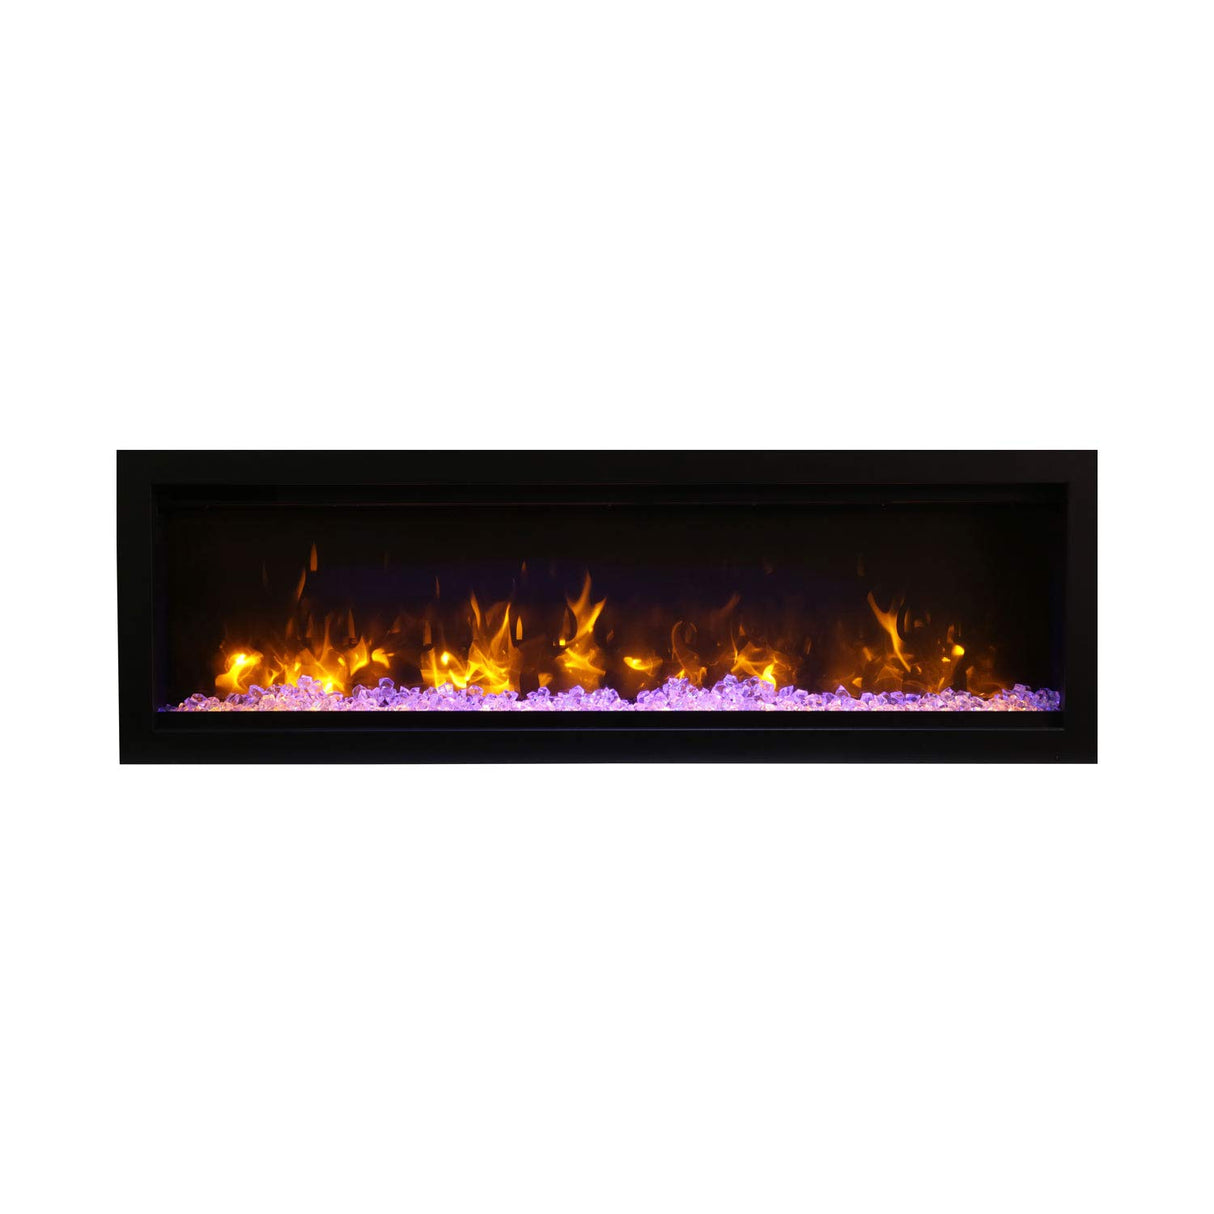 Amantii SYM-50 Symmetry Smart Electric  50" Indoor / Outdoor WiFi Enabled Built In Fireplace, Featuring a MultiFunction Remote Control , Multi Speed Flame Motor and a 10 piece Birch Log Set